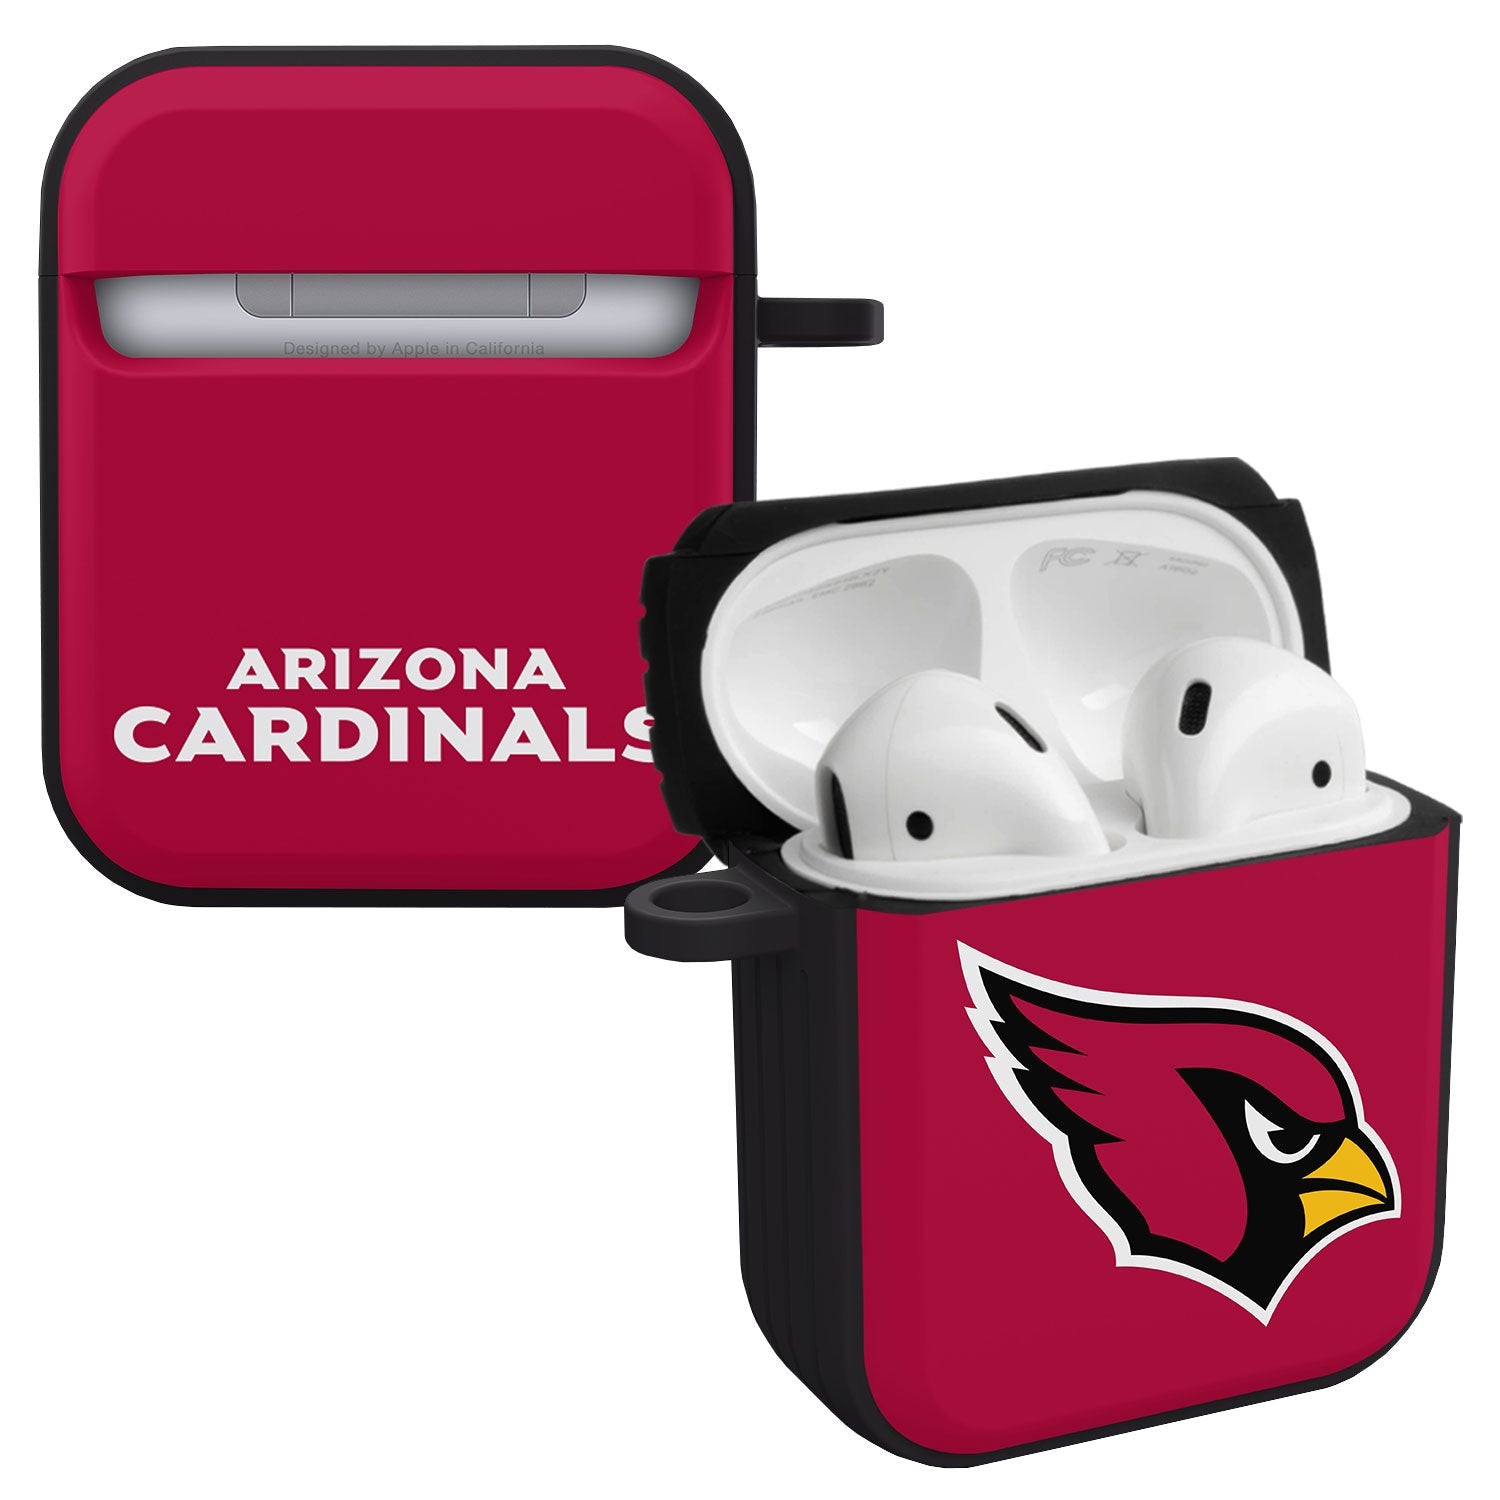 Arizona Cardinals HDX Case Cover Compatible with Apple AirPods Gen 1 & 2